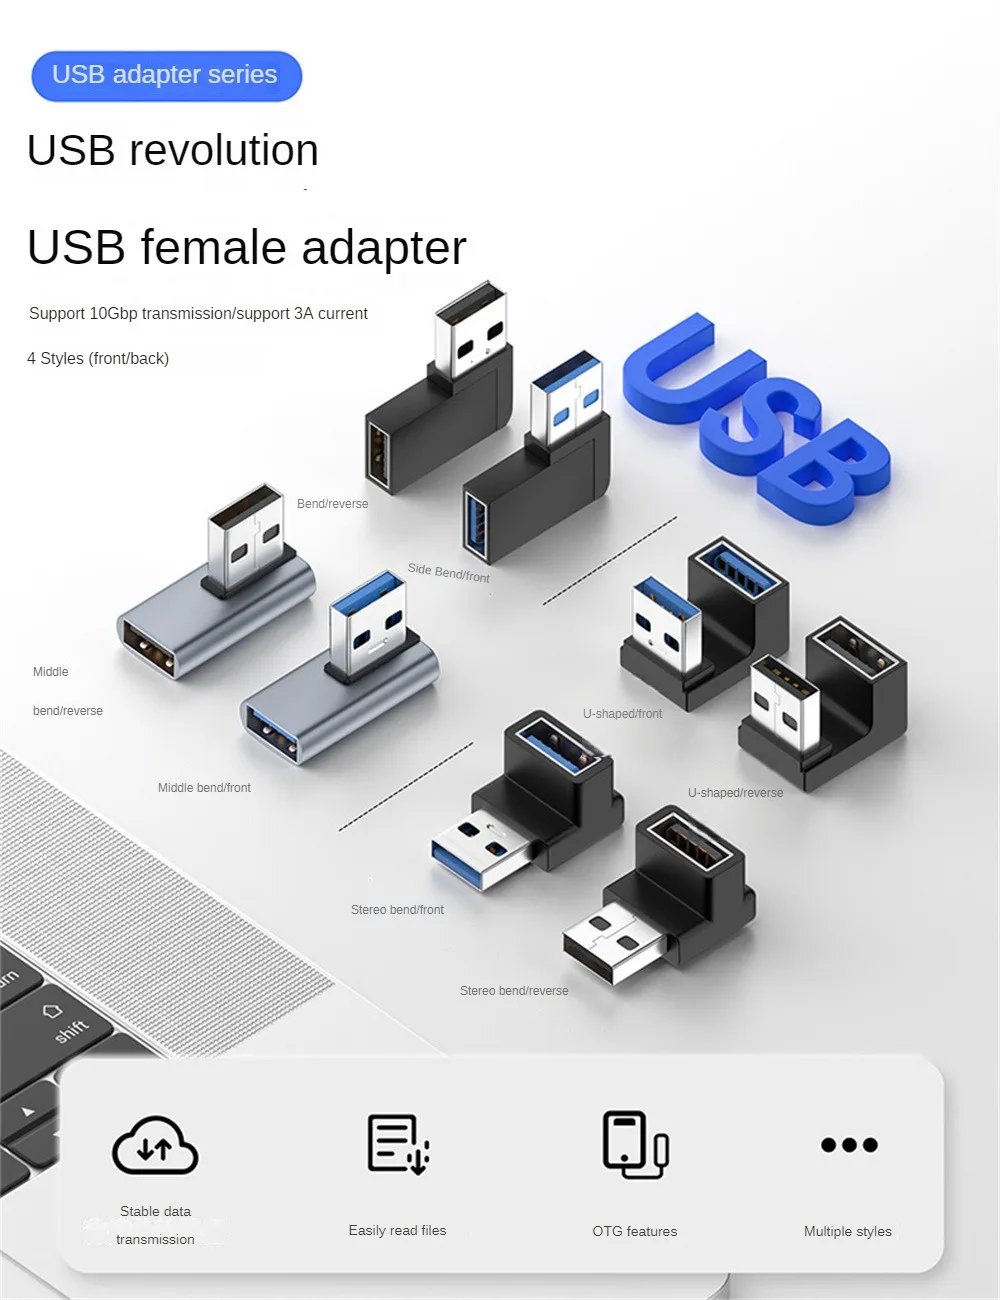 Sb5989442c848454ea79069a50b0211cdl 1pc USB Adapter 90 Degree Right Angle USB Female To USB Male Adapter 10Gbps Data Transfer Converter Coupler For Laptop Computer